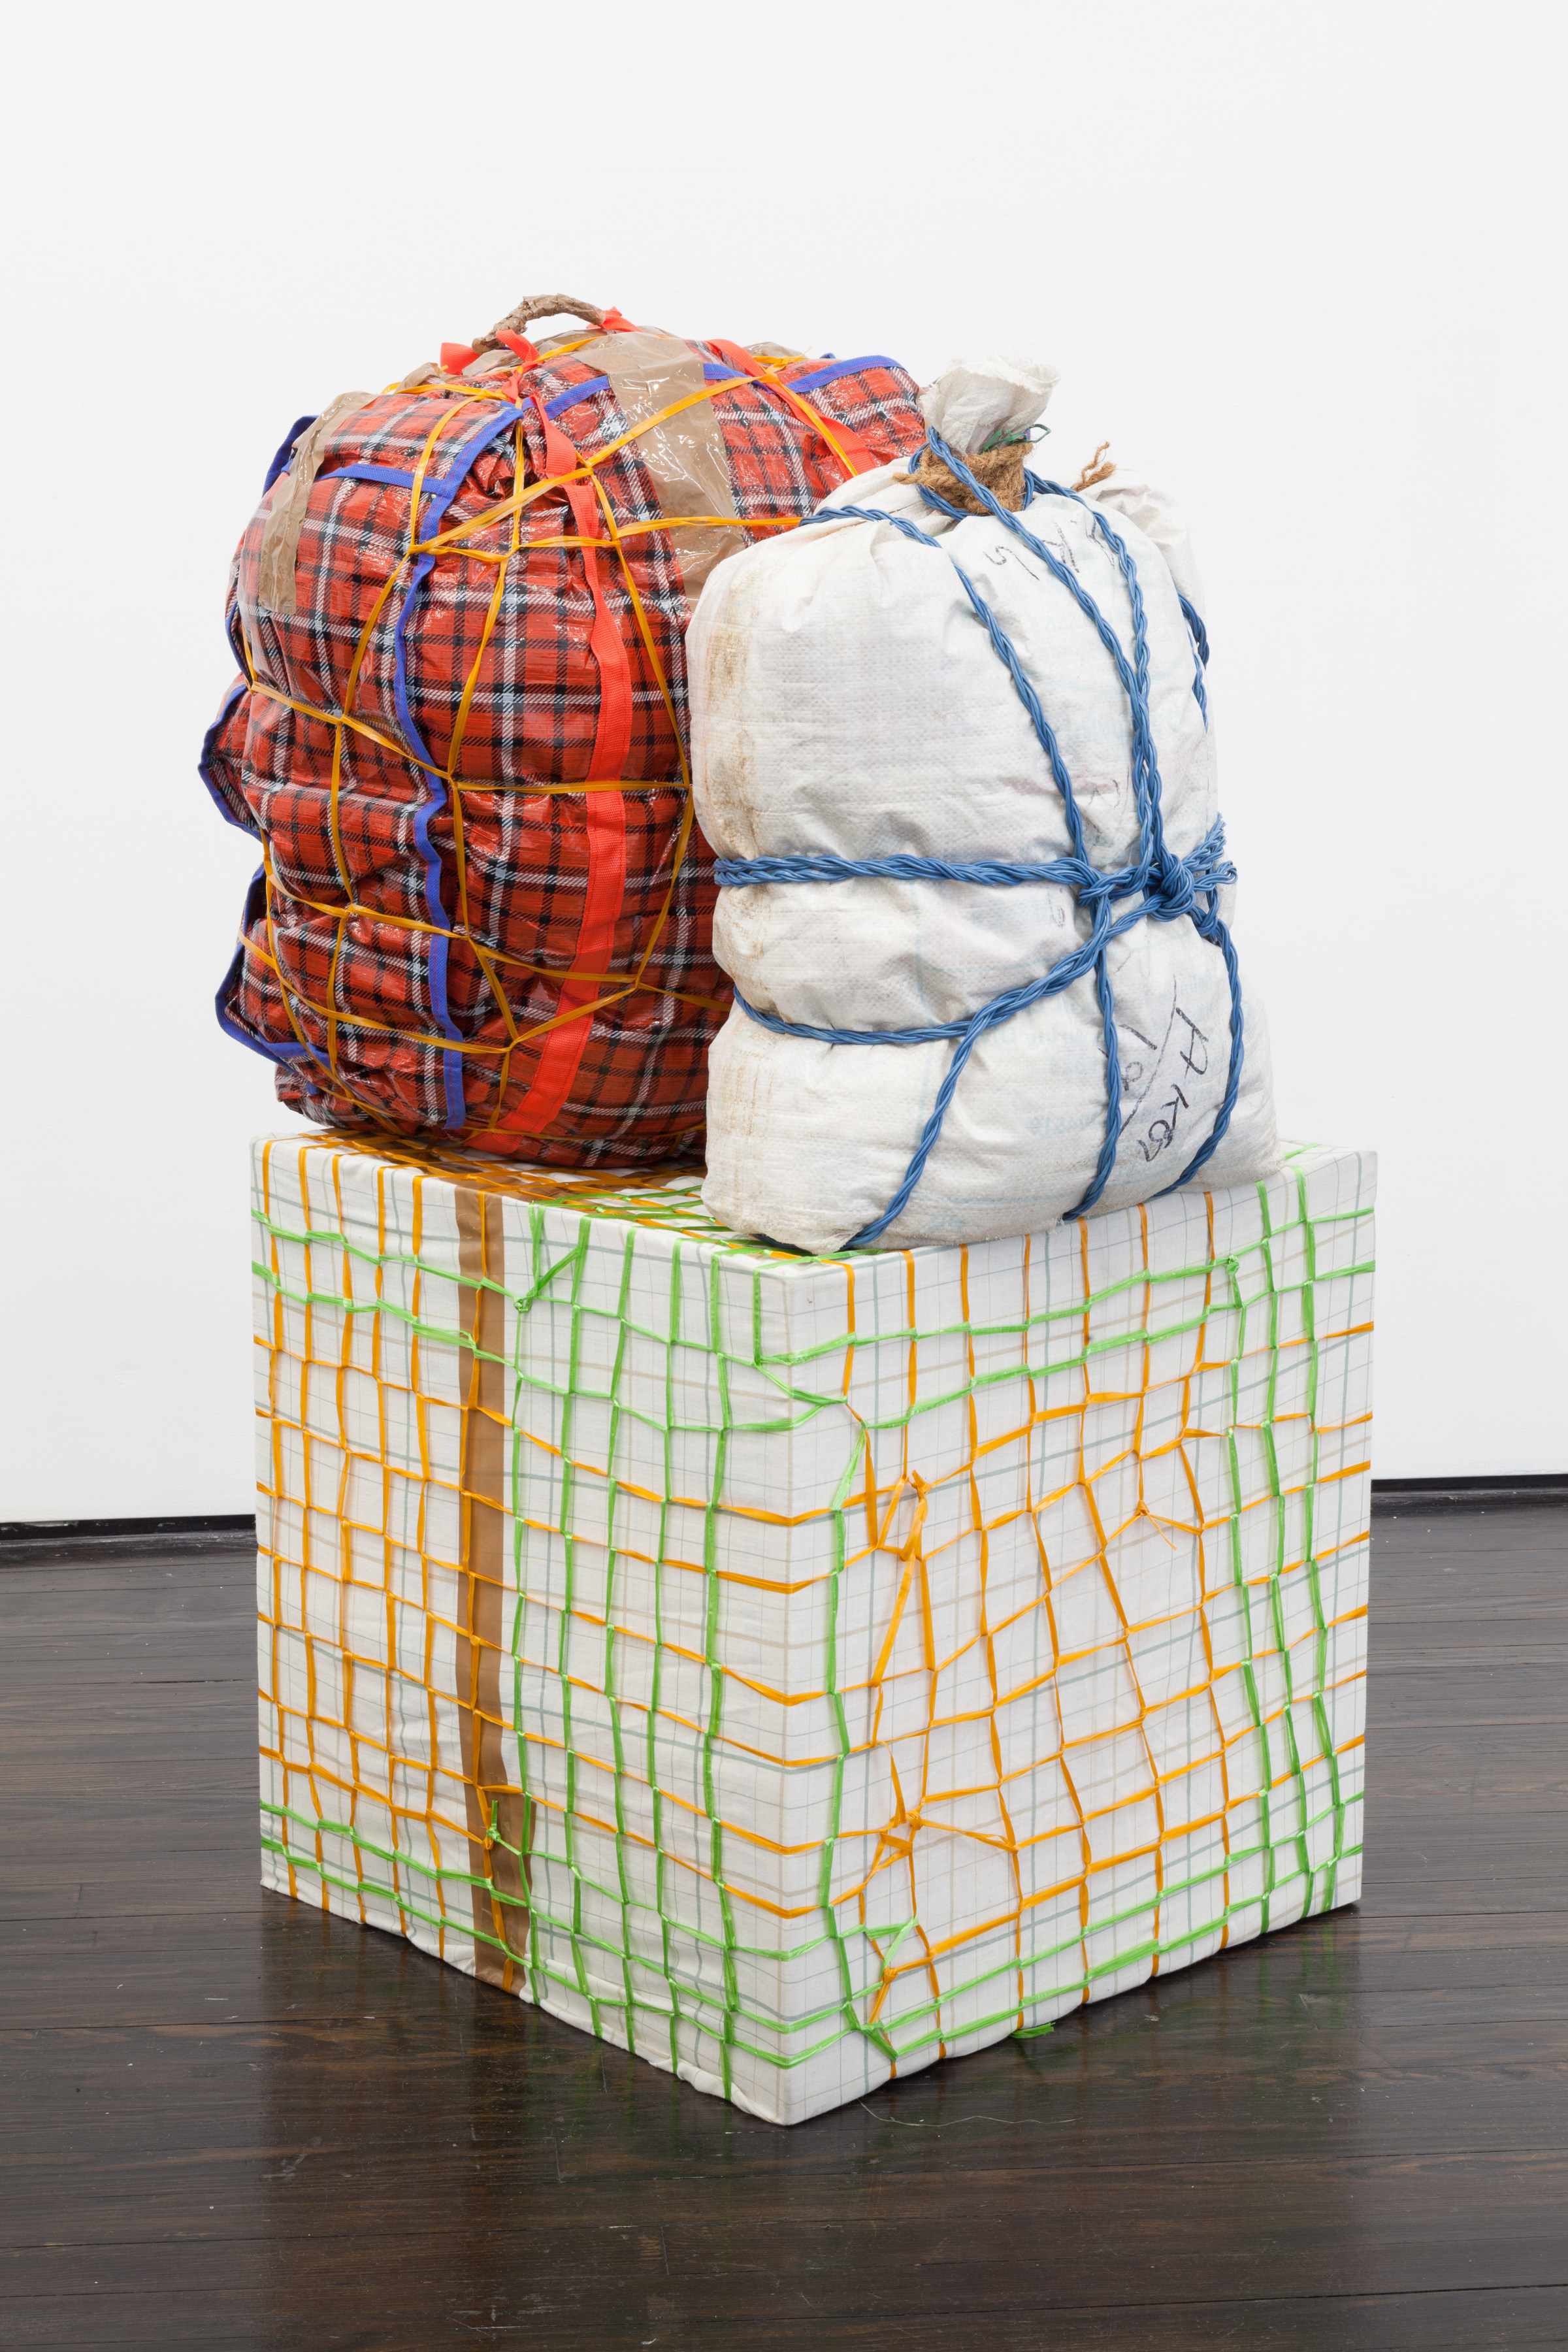 Sculptural piece shaped like baggage bound together